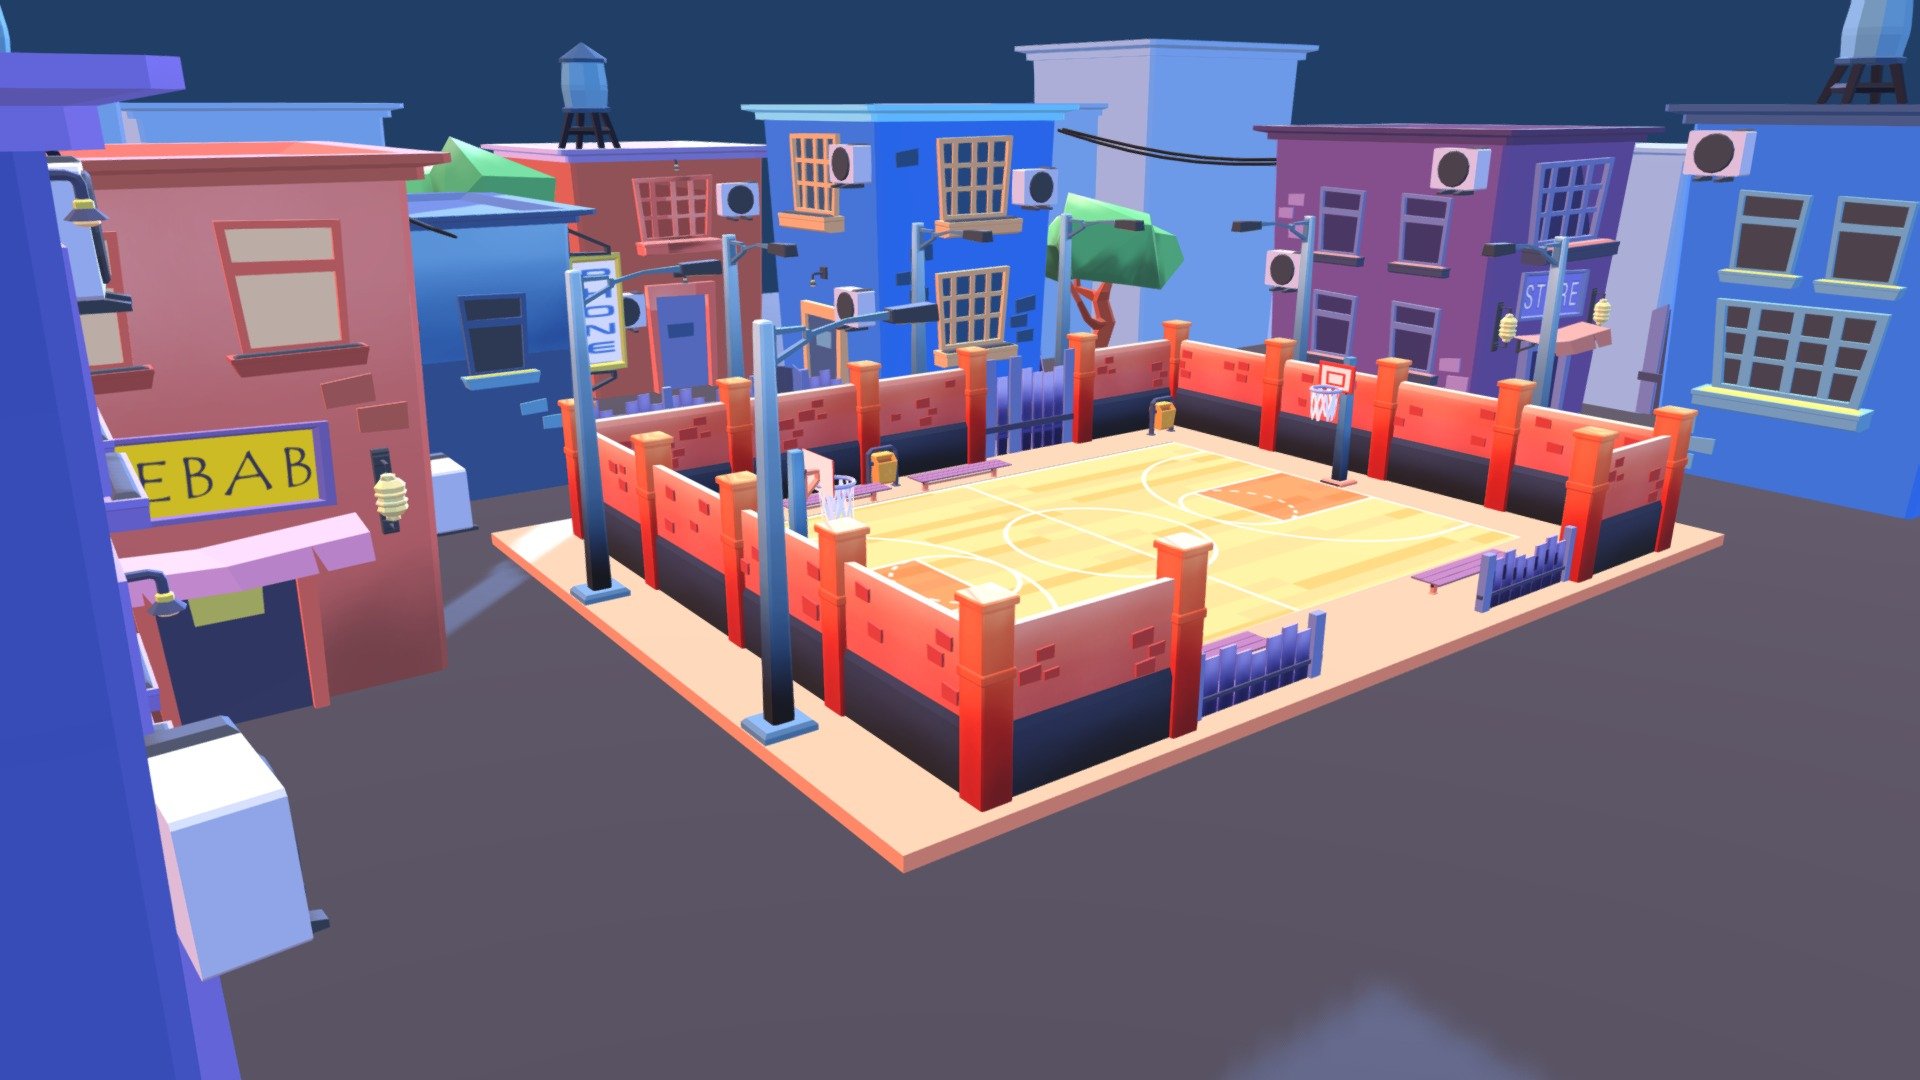 A scene with stylized buildings and a basketball court - Stylized city scene with a basketball-court 3d model